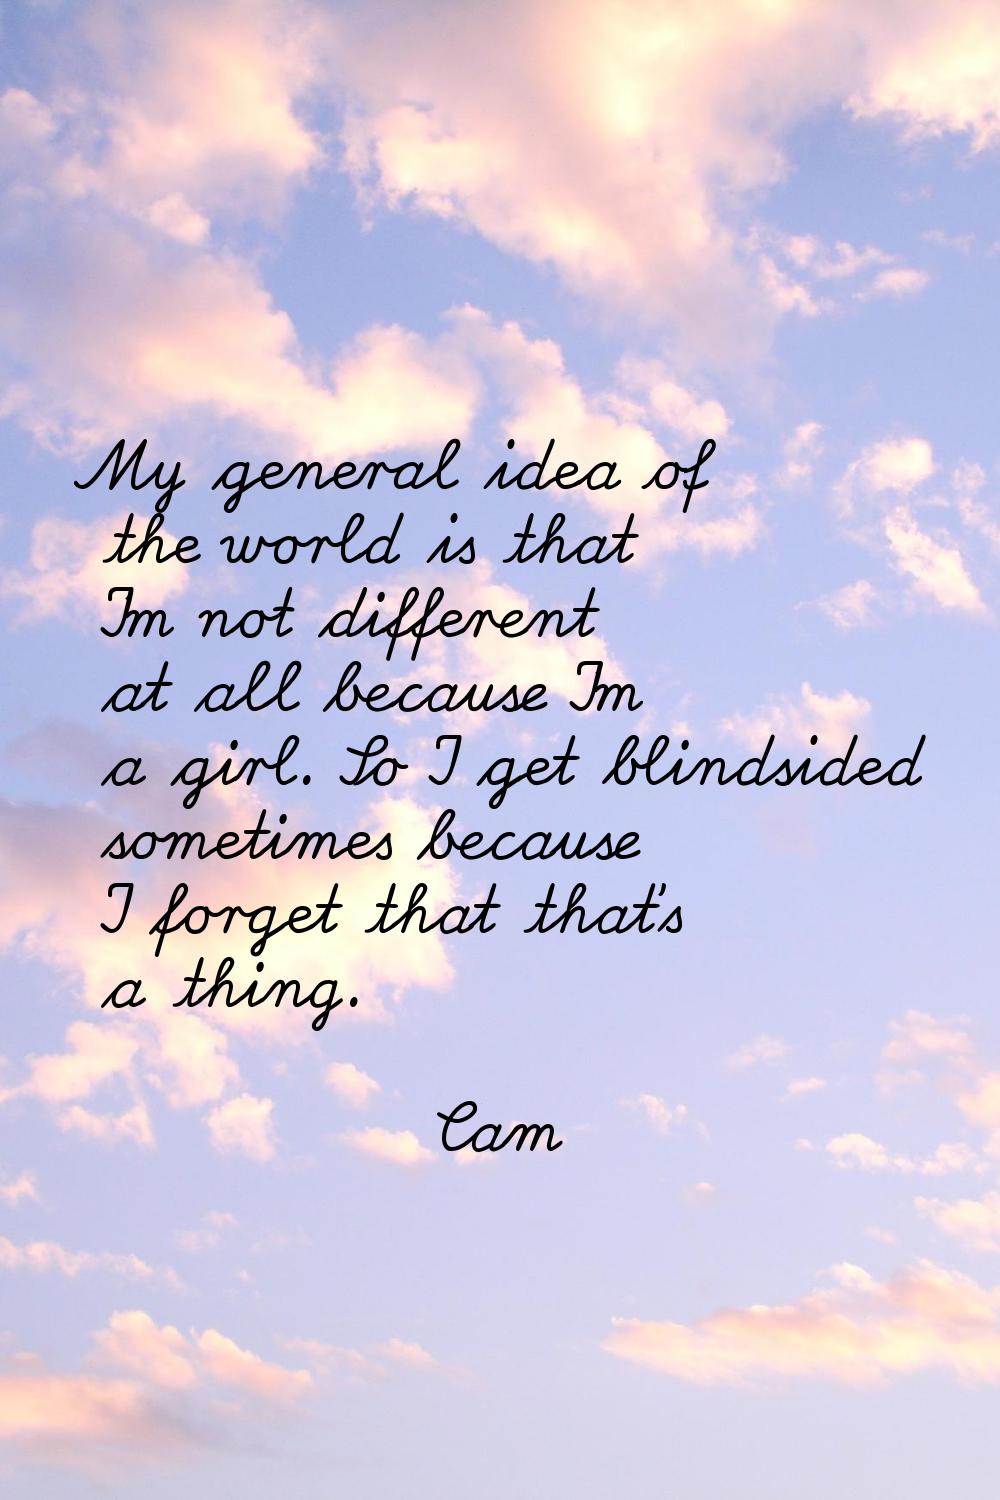 My general idea of the world is that I'm not different at all because I'm a girl. So I get blindsid